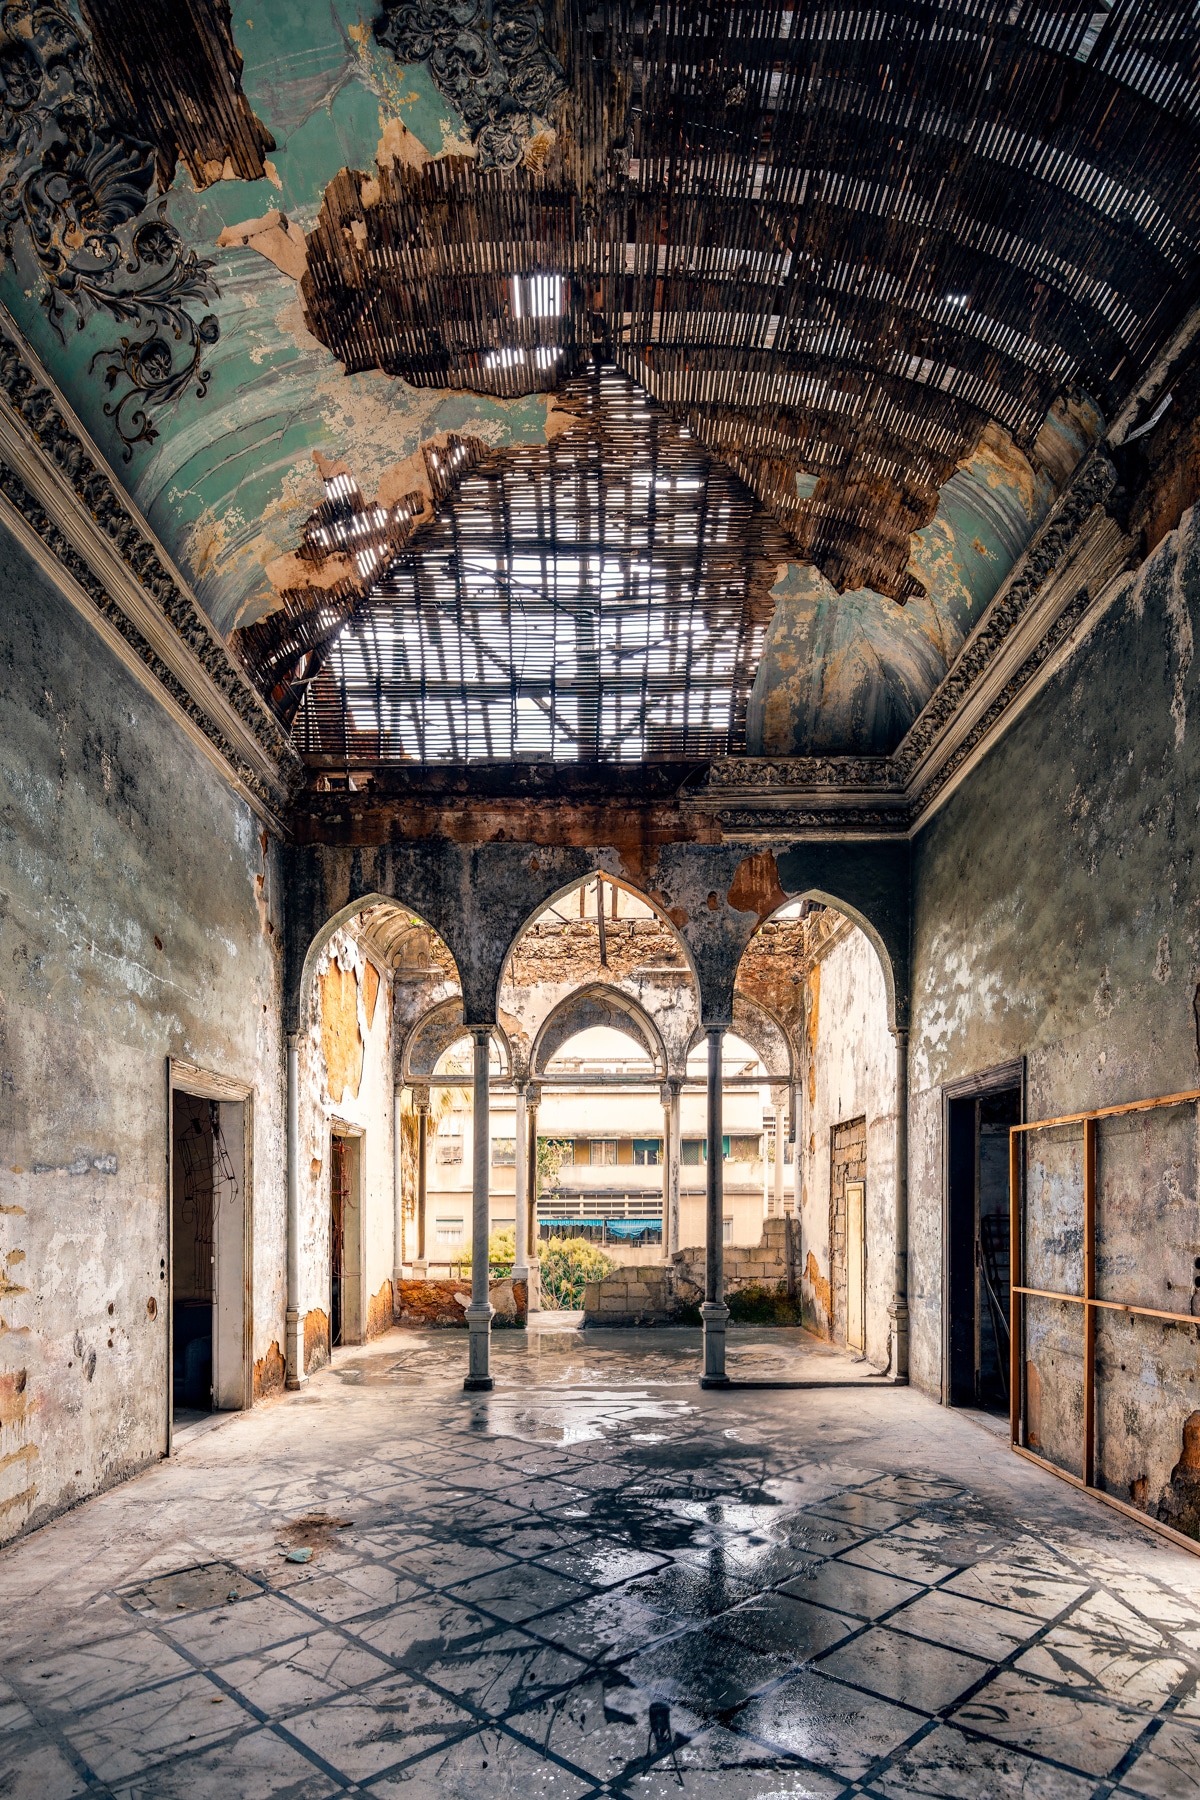 Abandoned Building in Beirut, Lebanon by James Kerwin